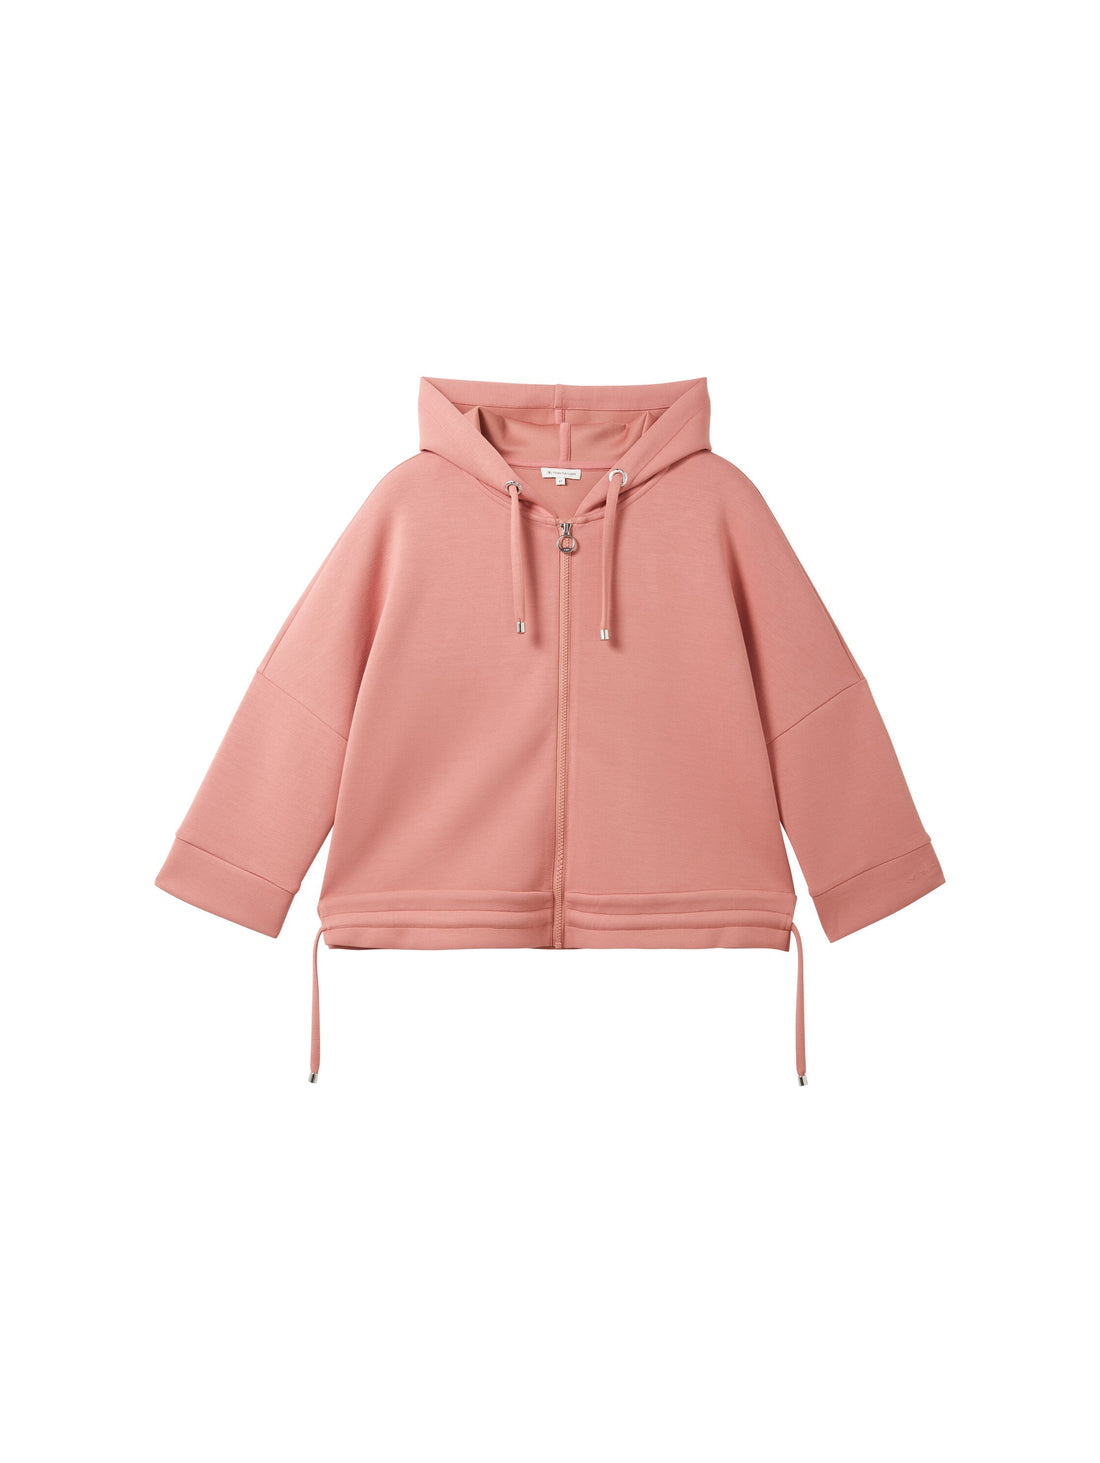 Hoodie With Adjustable Side Strap_1038182_32224_01